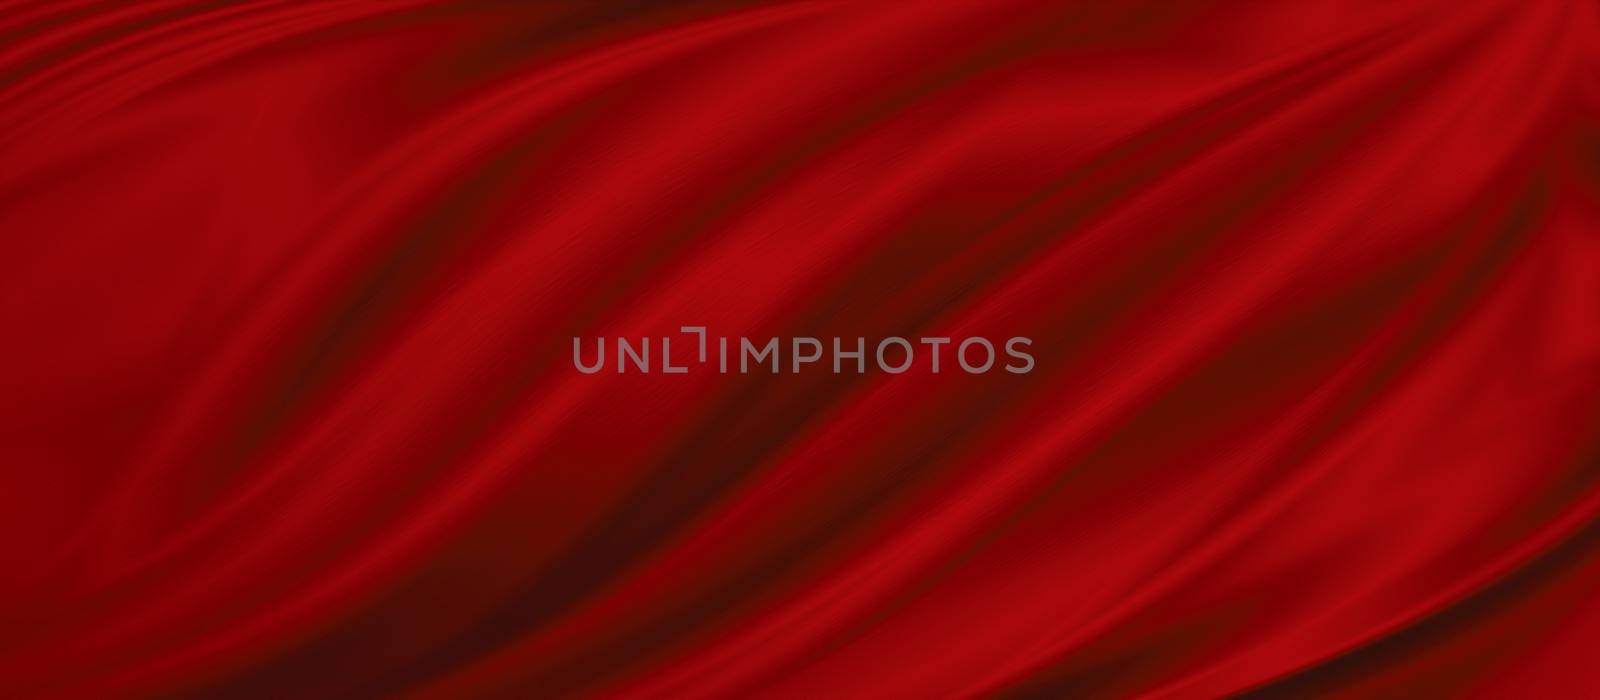 Red fabric texture background illustration by Myimagine